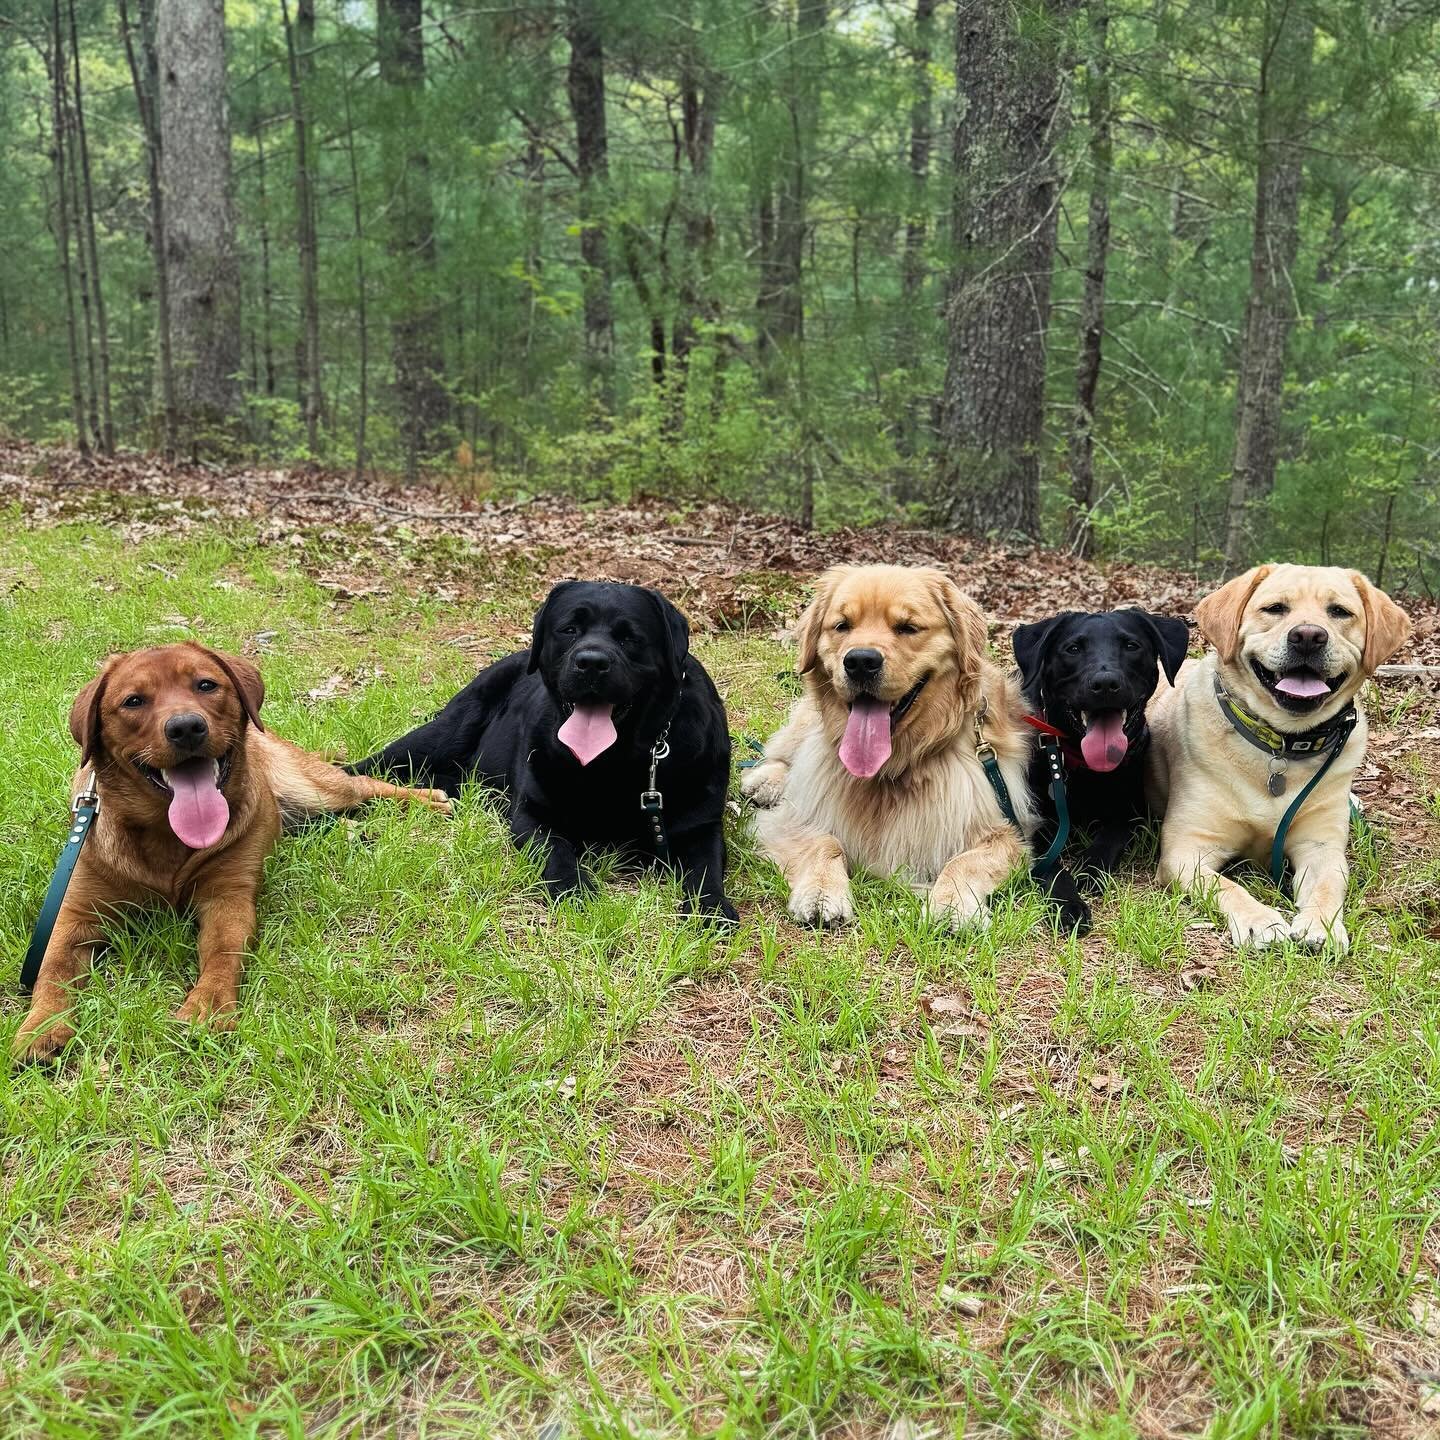 Happy Hump Day from Penny, Fife, Colt, Fergie and Clyde!